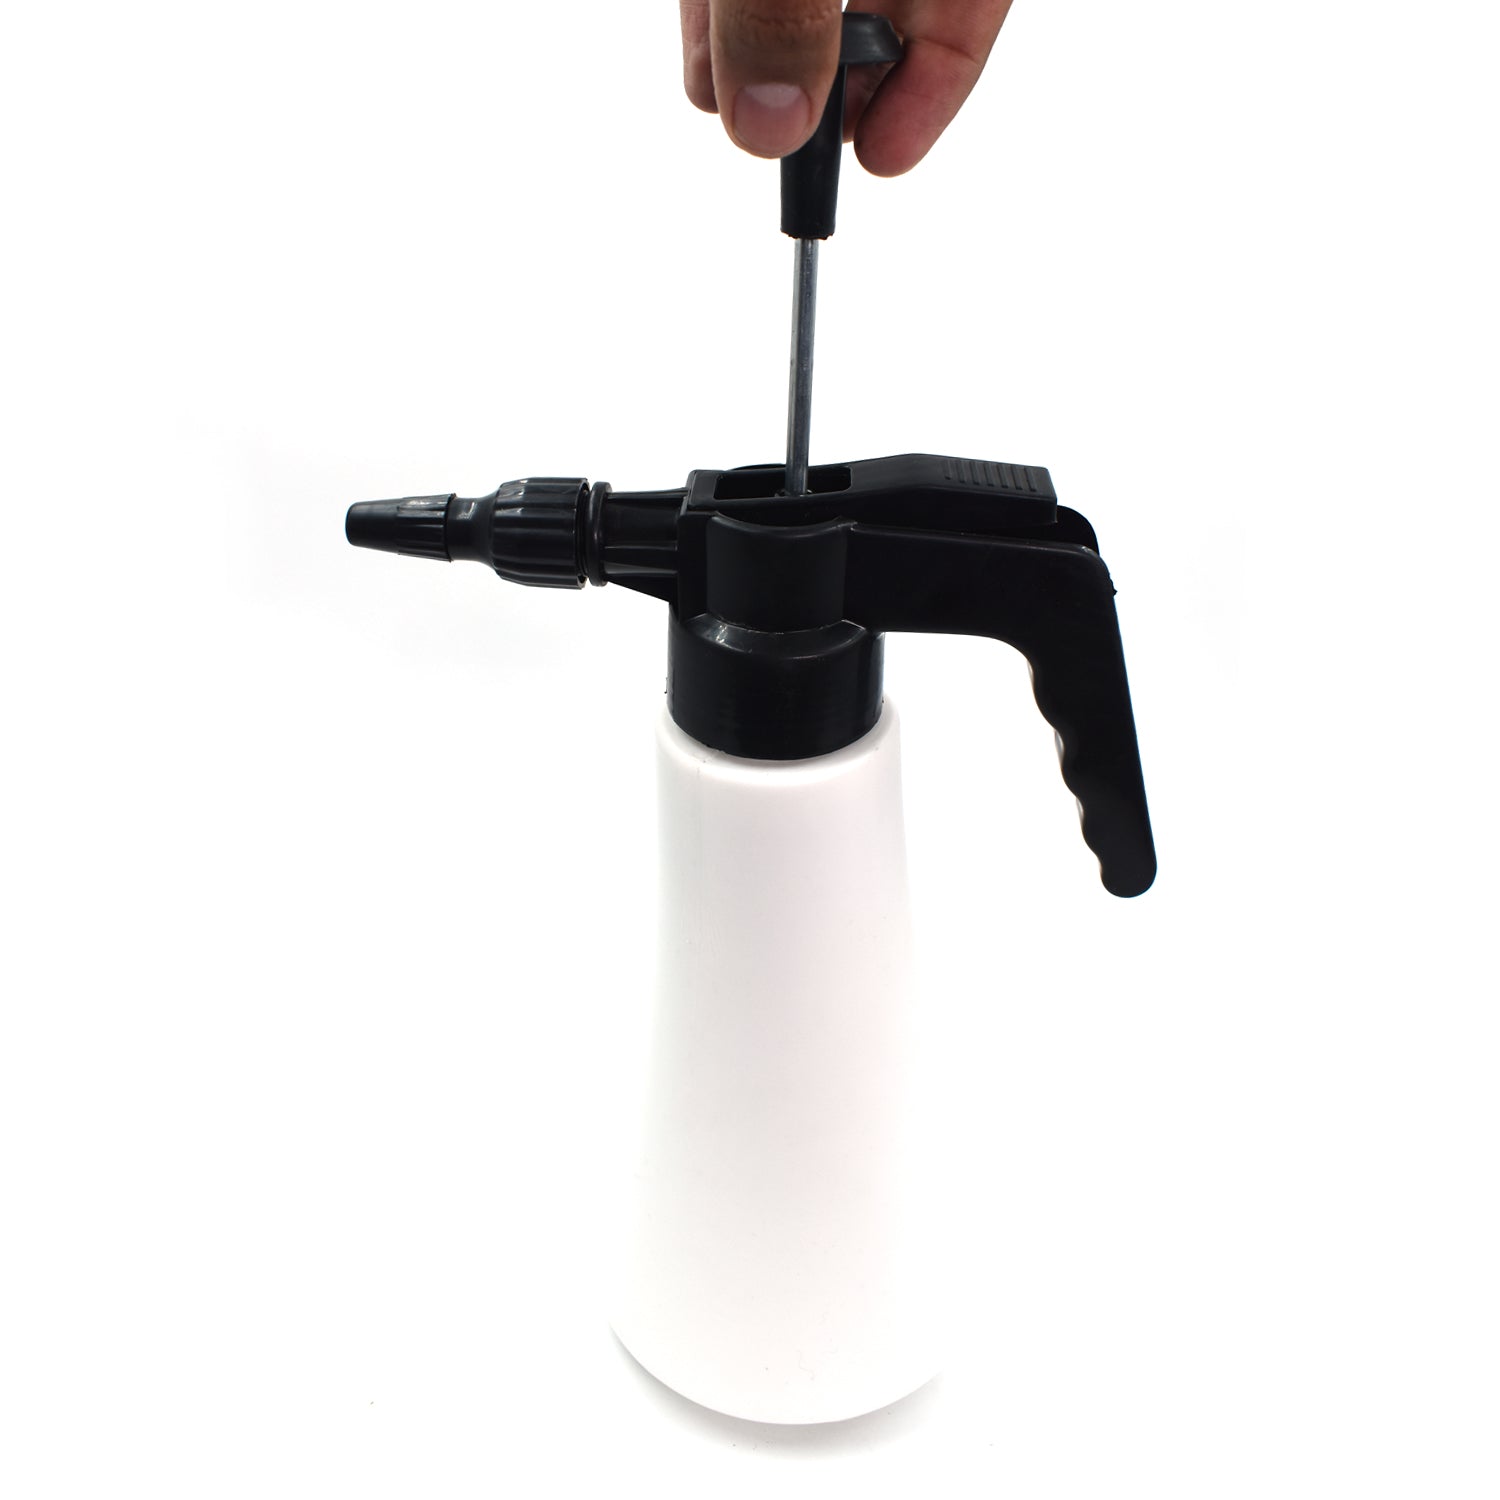 9023 1 litre Garden Sprayer used in all kinds of garden and park for sprinkling and showering purposes. DeoDap